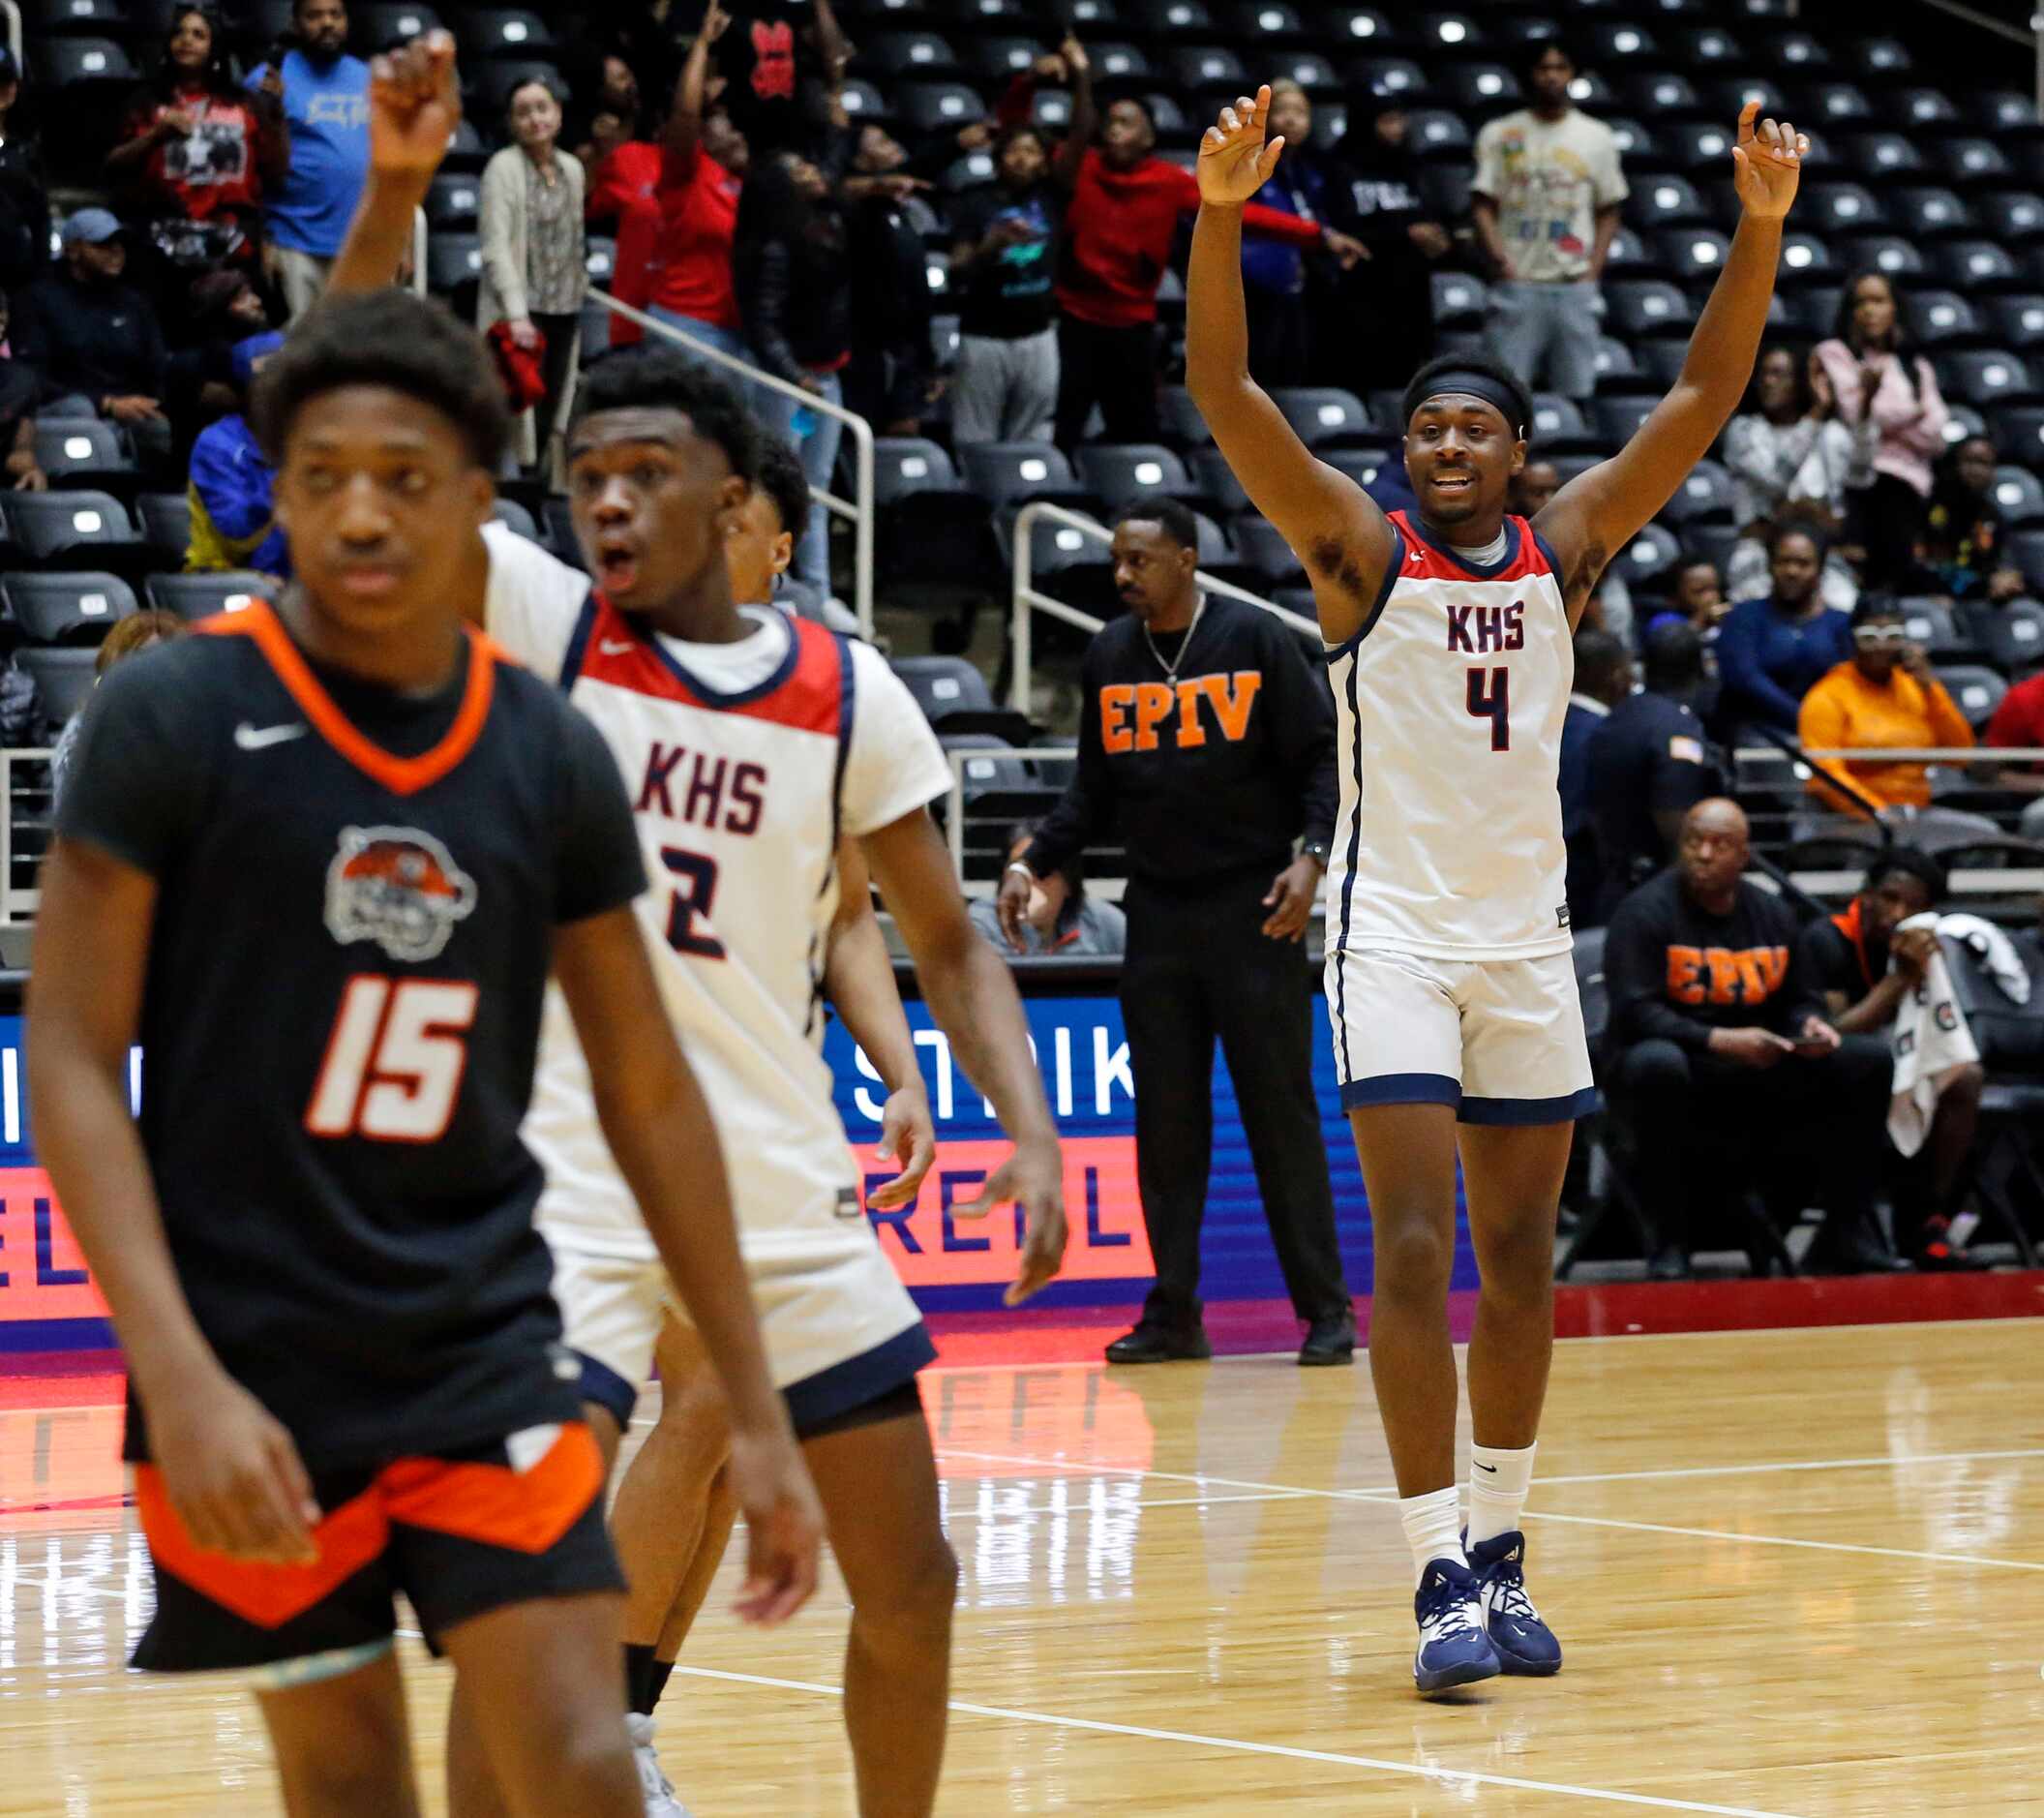 Kimball High’s T’Johnn Brown (2) and Kimball High’s DaCannon Wickware (4) celebrate, as the...